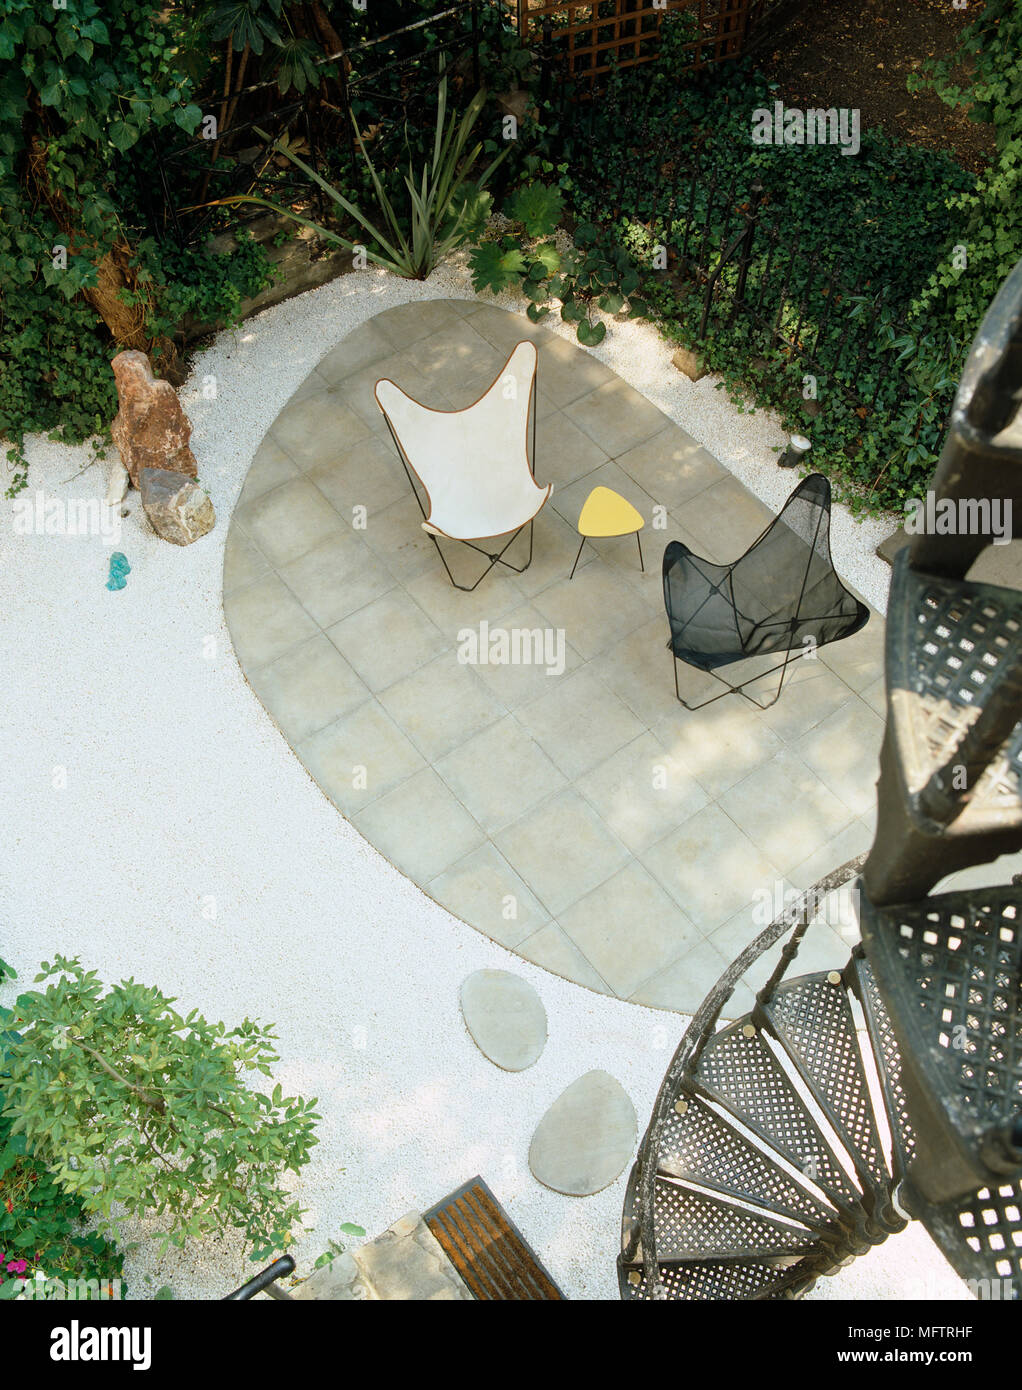 Above view of metal chairs on paved patio area of town garden Stock Photo